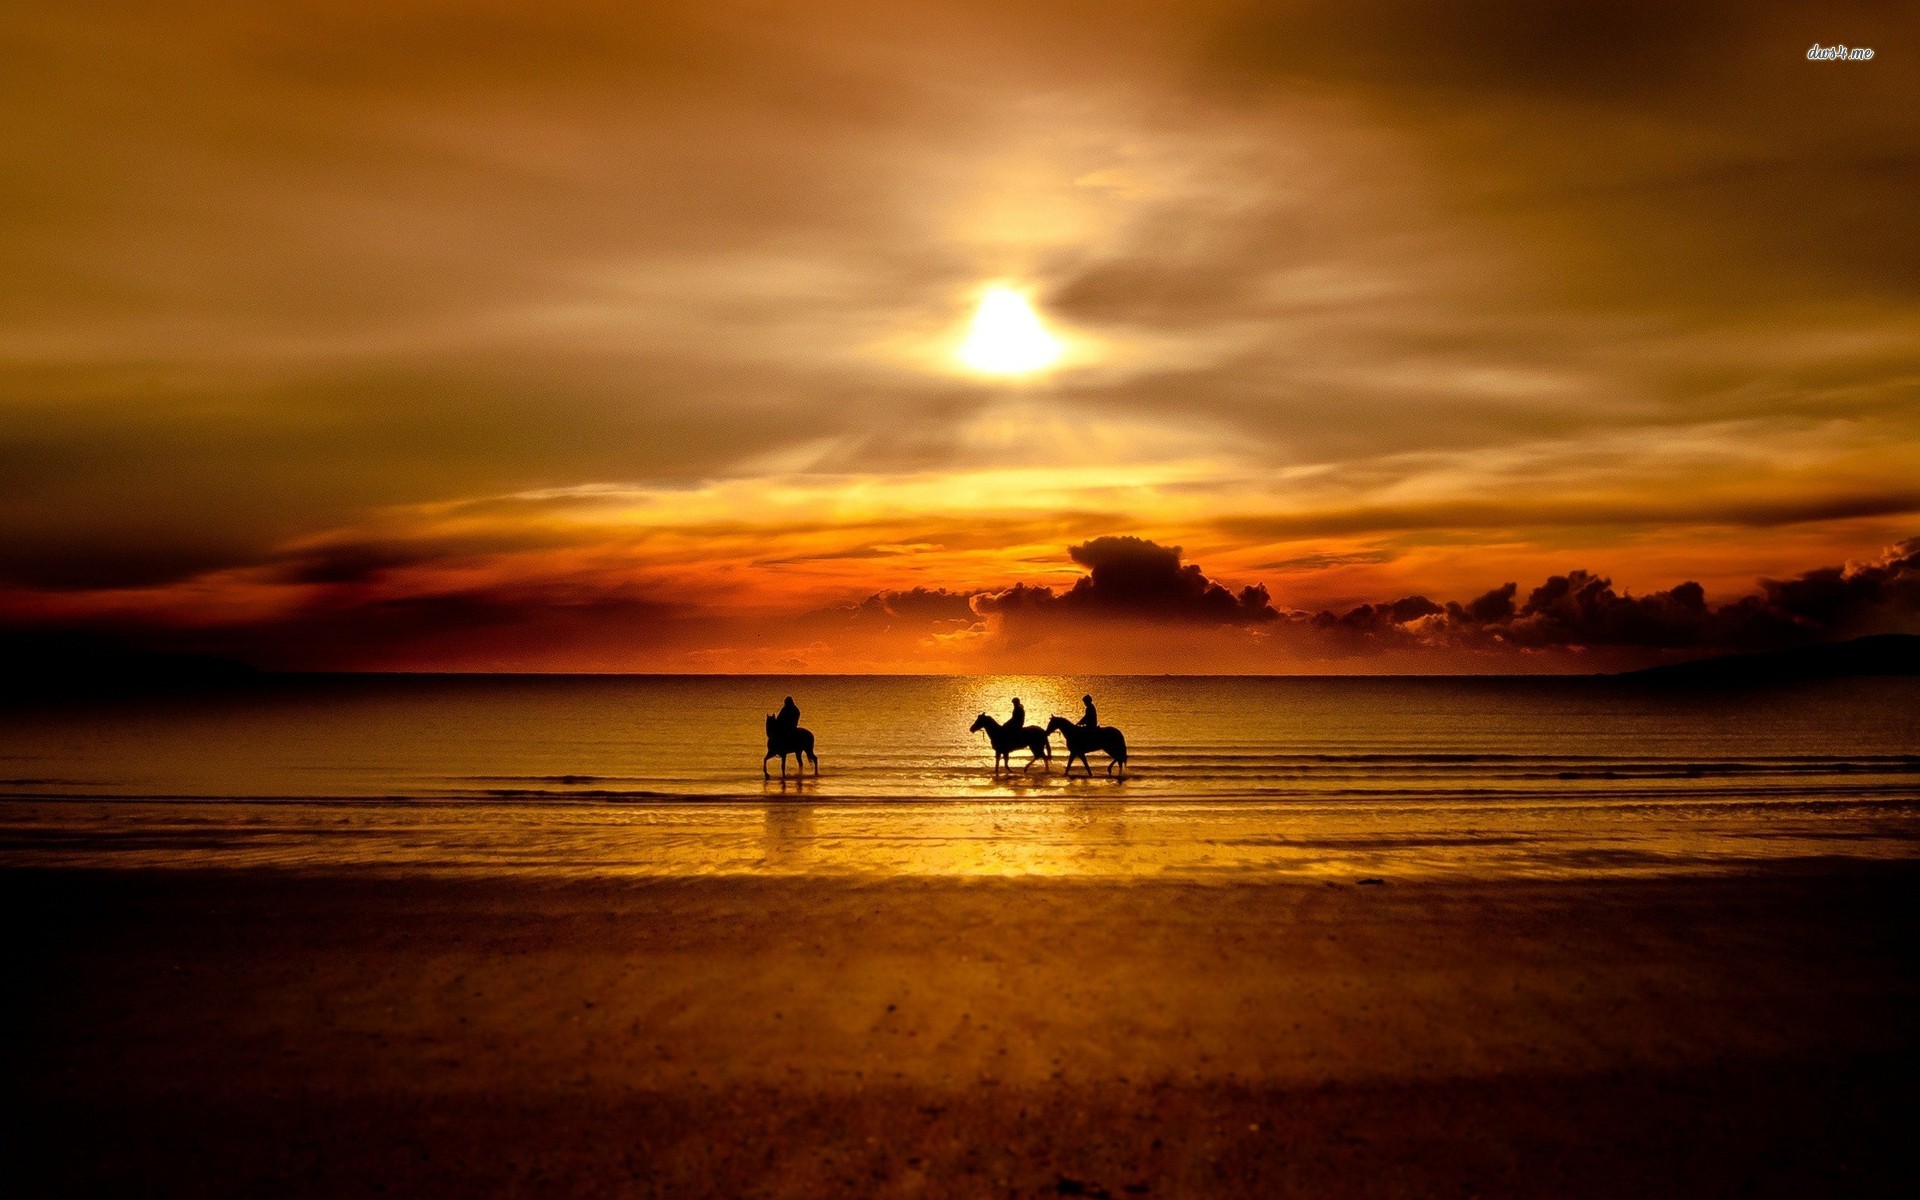 Horseback Riding in The Sunset Wallpaper Beach Wallpapers 1920x1200px